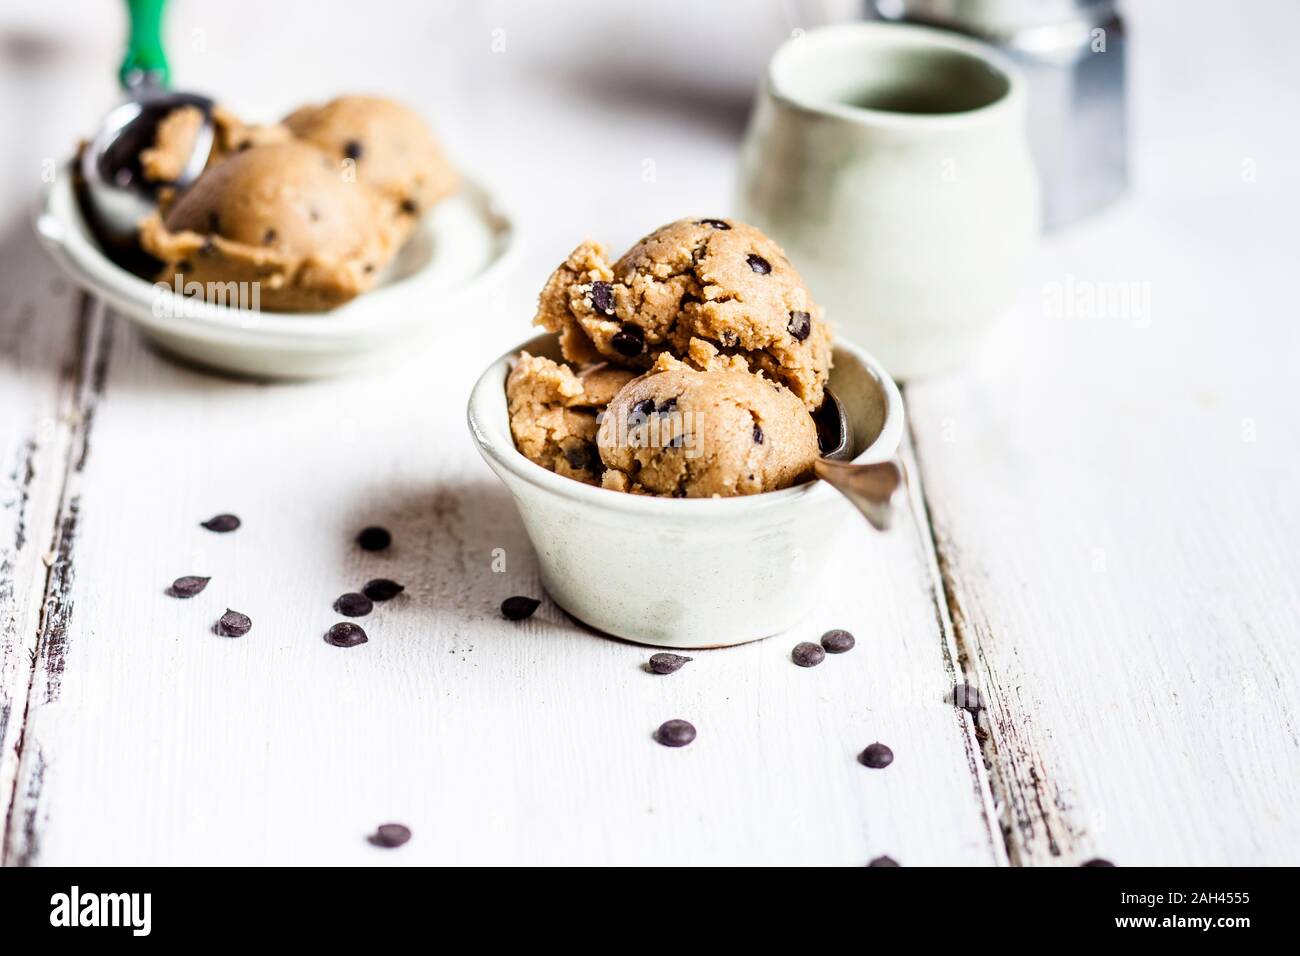 Raw vegan chocolate chip cookie dough made from almond meal, coconut flour, coconut oil, chocolate chips and maple syrup Stock Photo